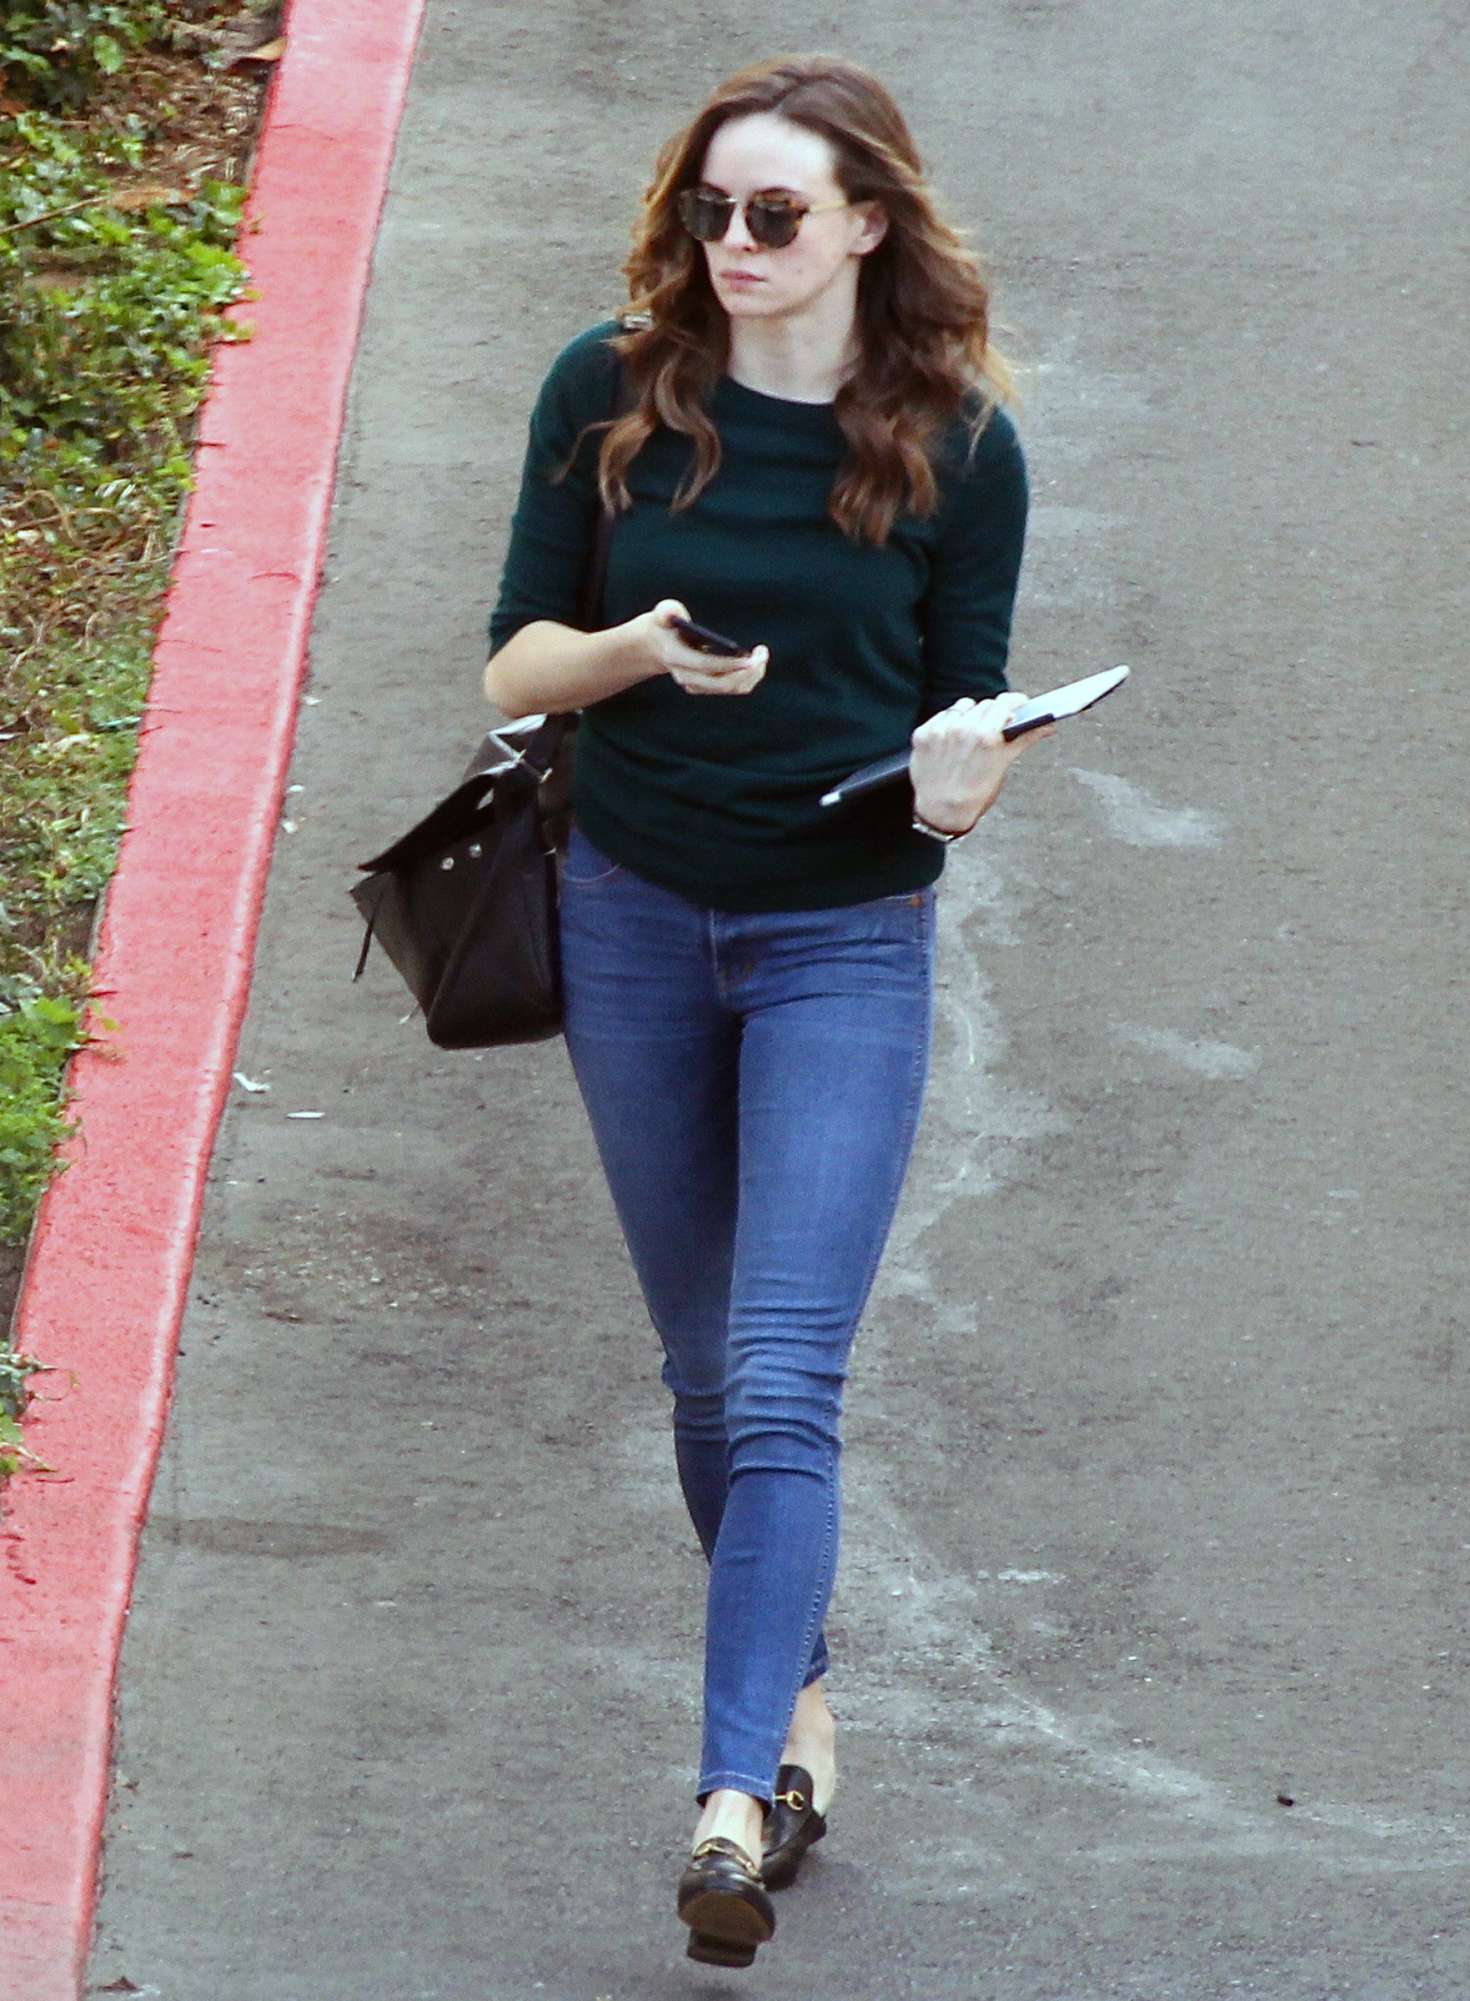 Danielle Panabaker in Jeans.